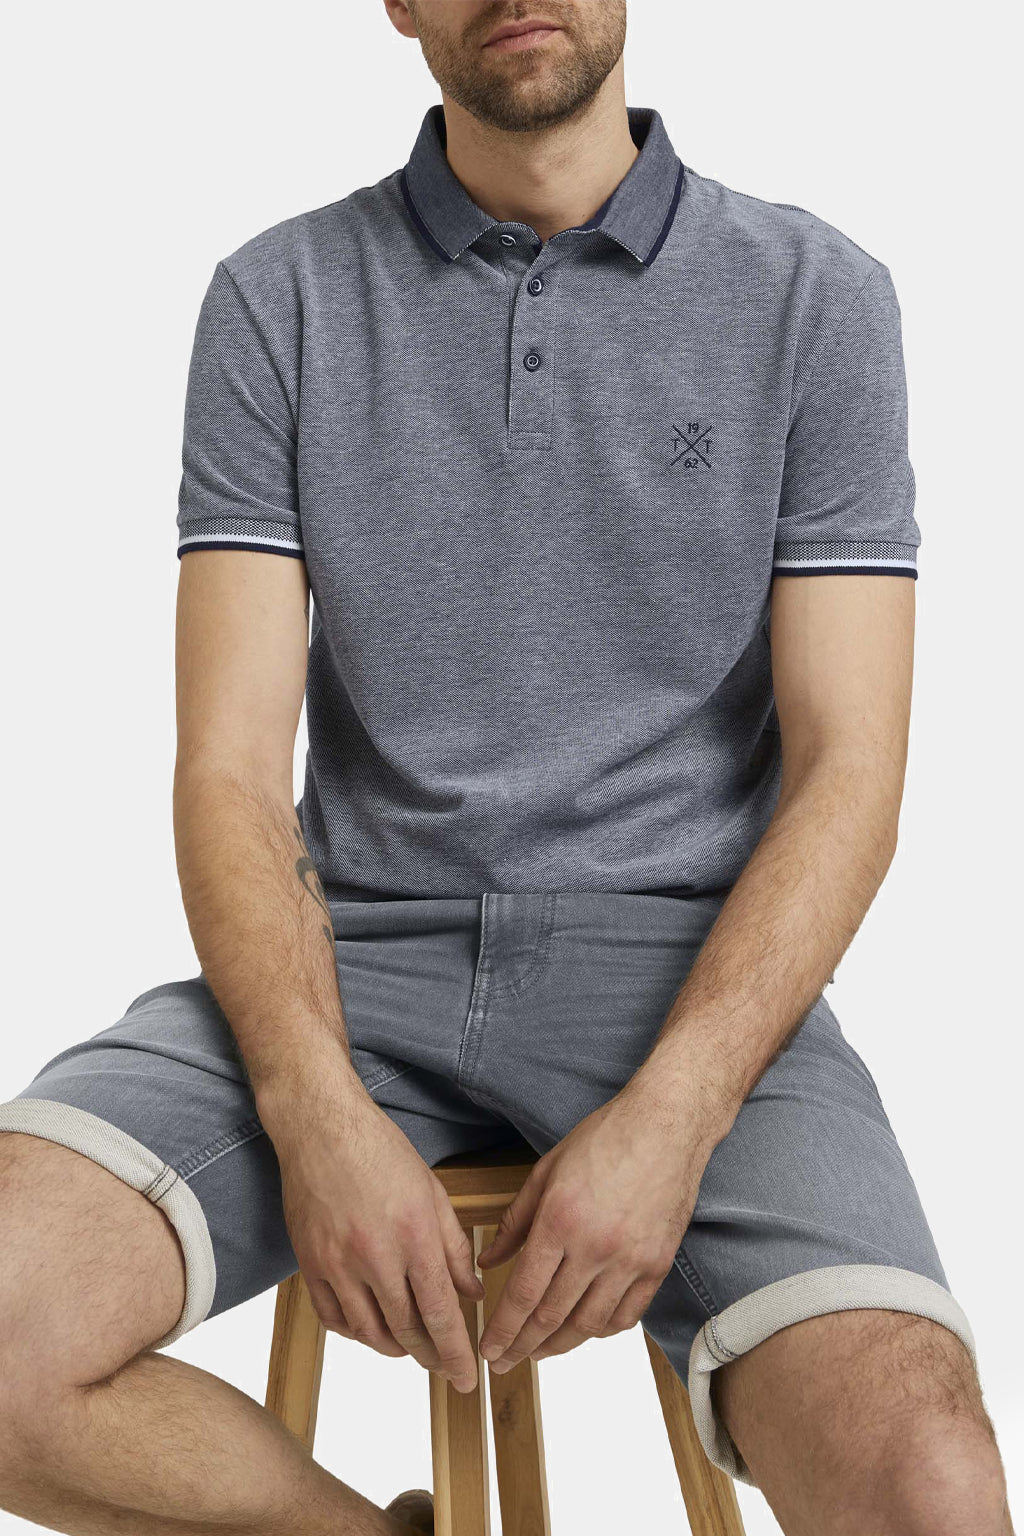 Tom Tailor - Structured Polo Shirt